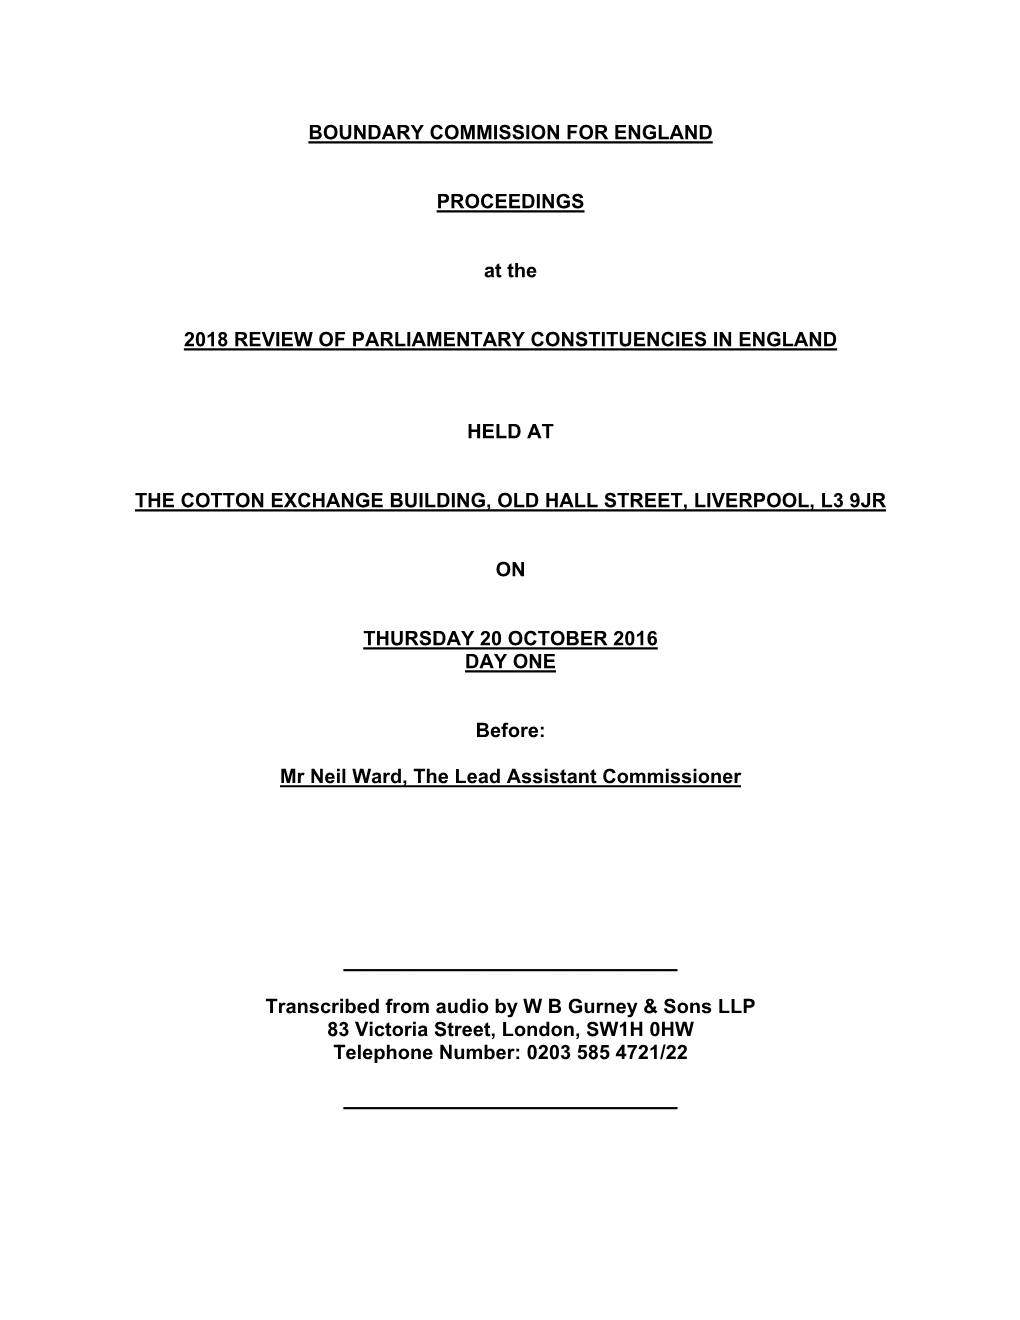 BOUNDARY COMMISSION for ENGLAND PROCEEDINGS at The